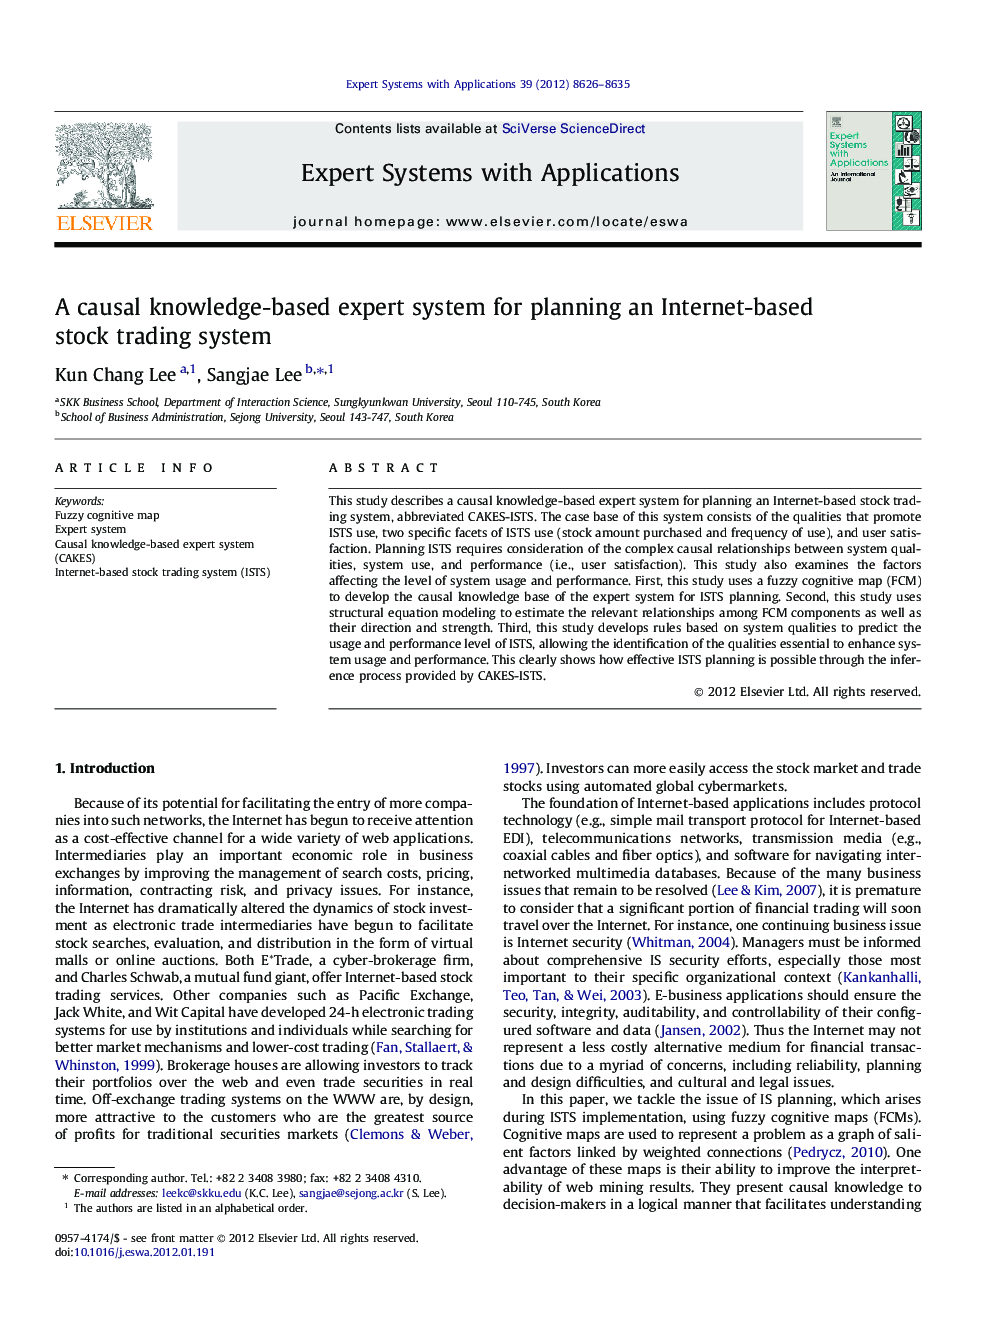 A causal knowledge-based expert system for planning an Internet-based stock trading system